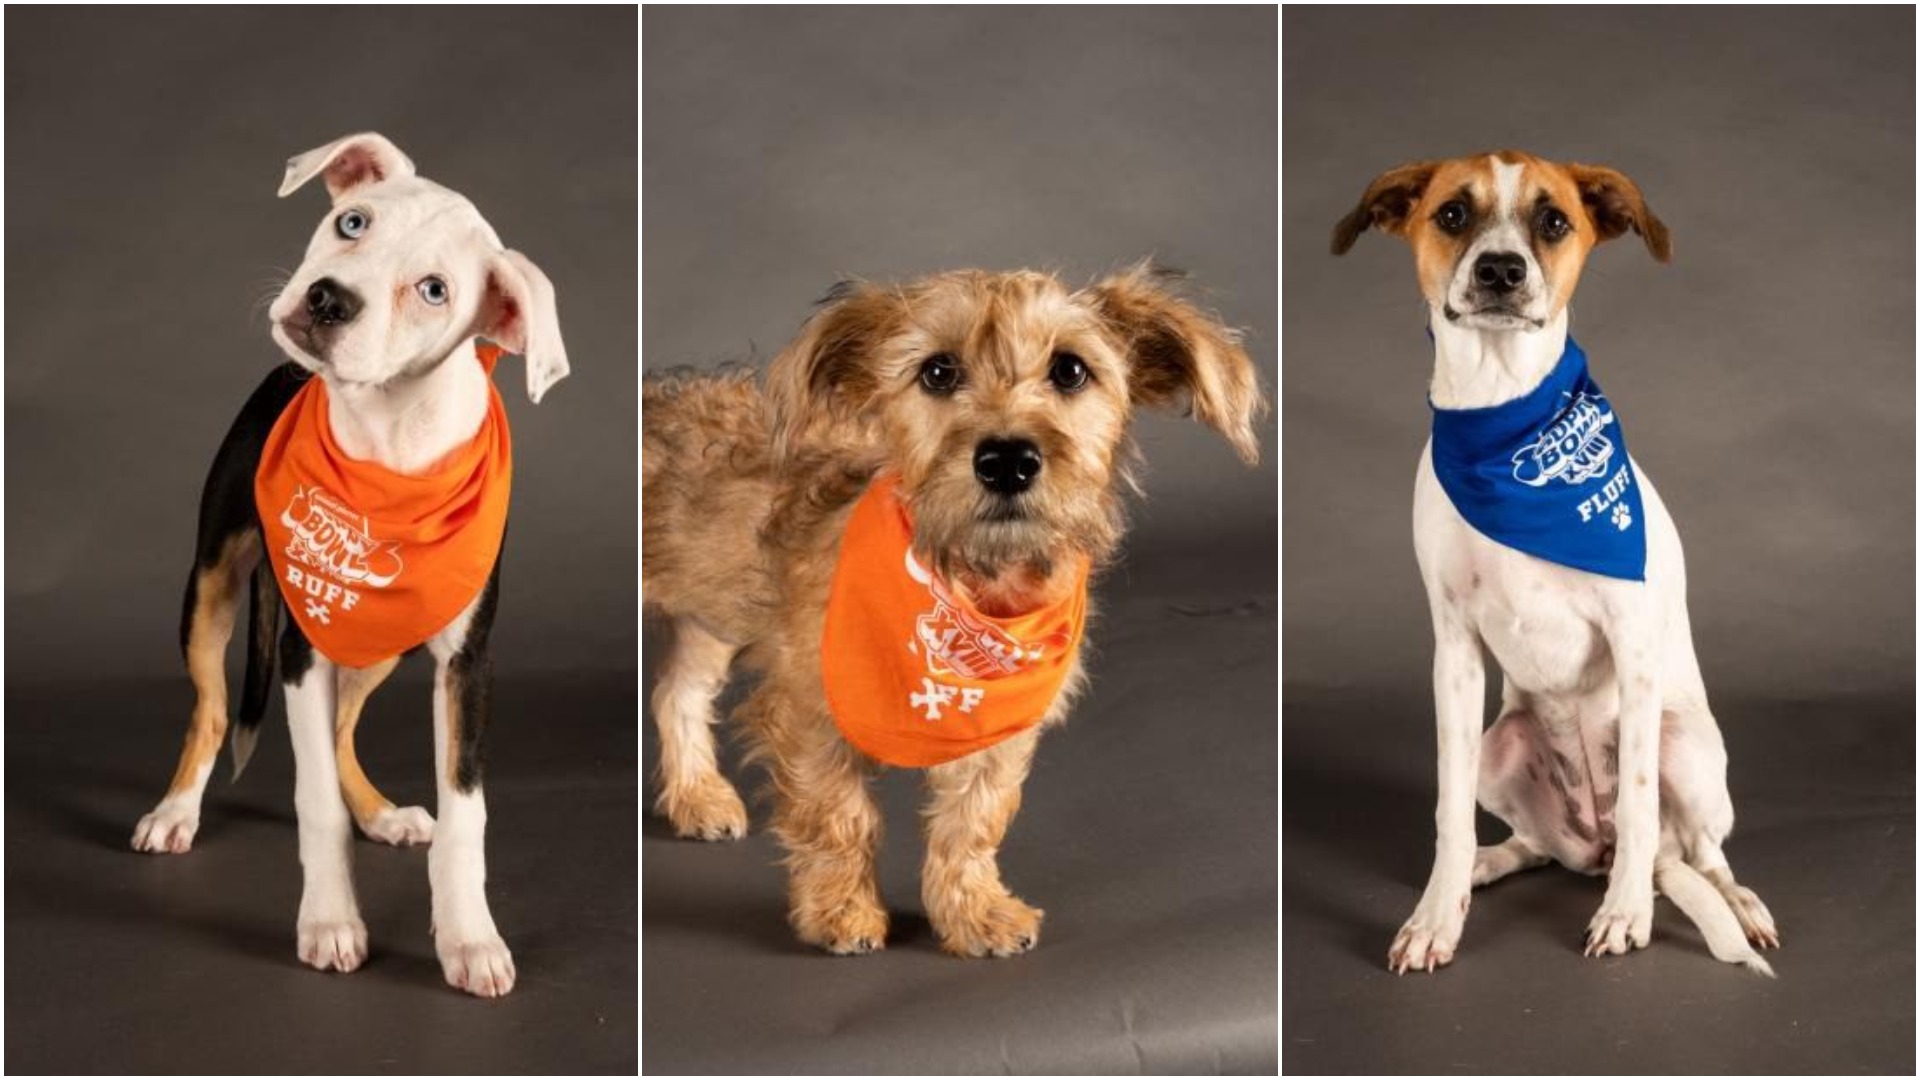 Meet the Tampa Bay dogs starring in the Puppy Bowl